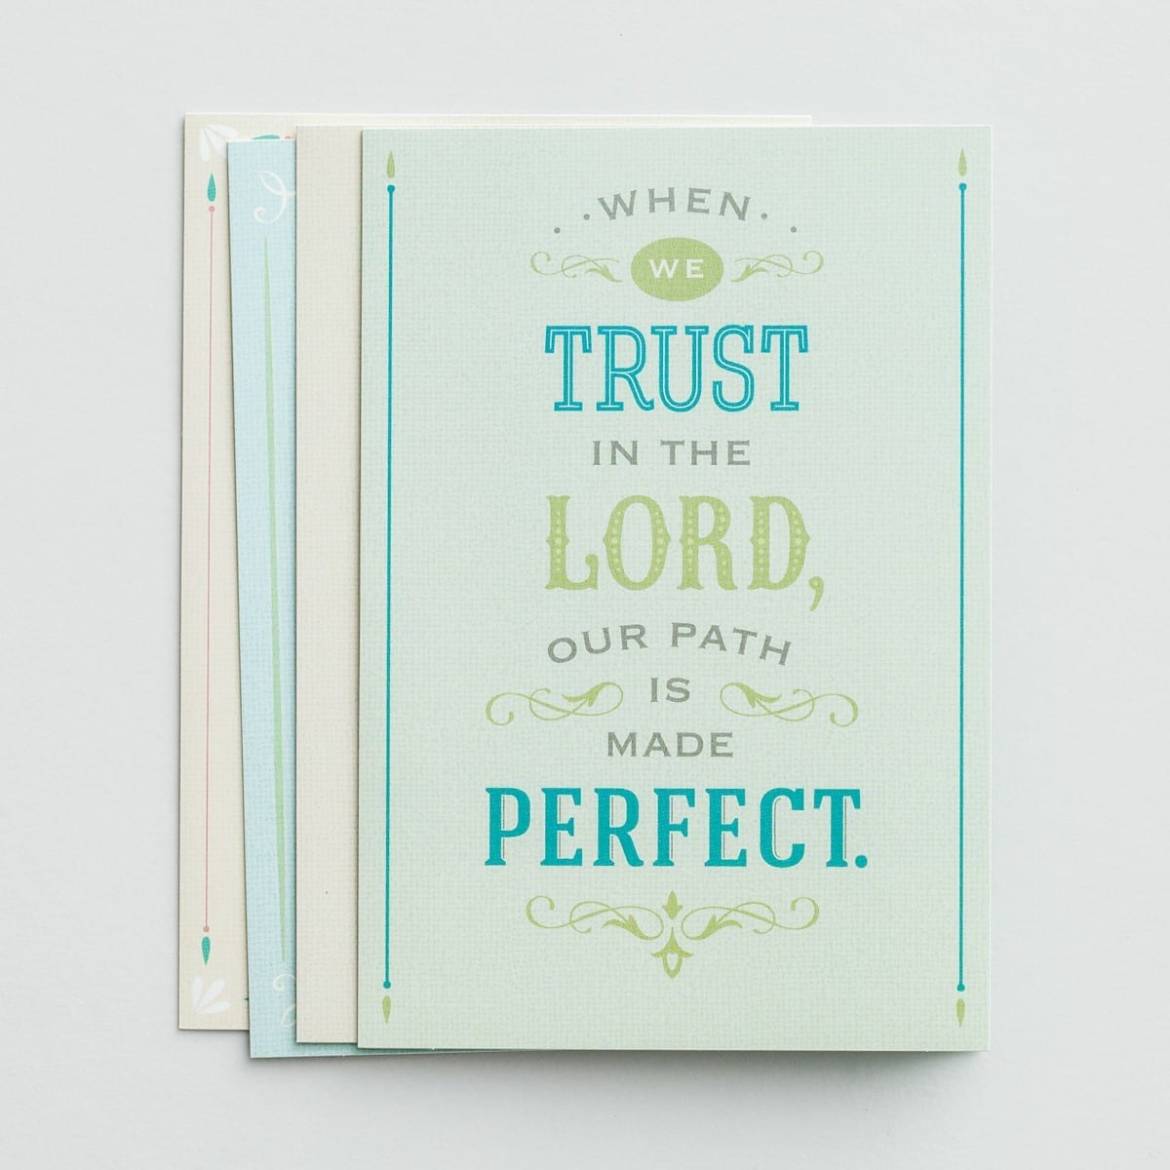 Trust-in-the-Lord.jpg